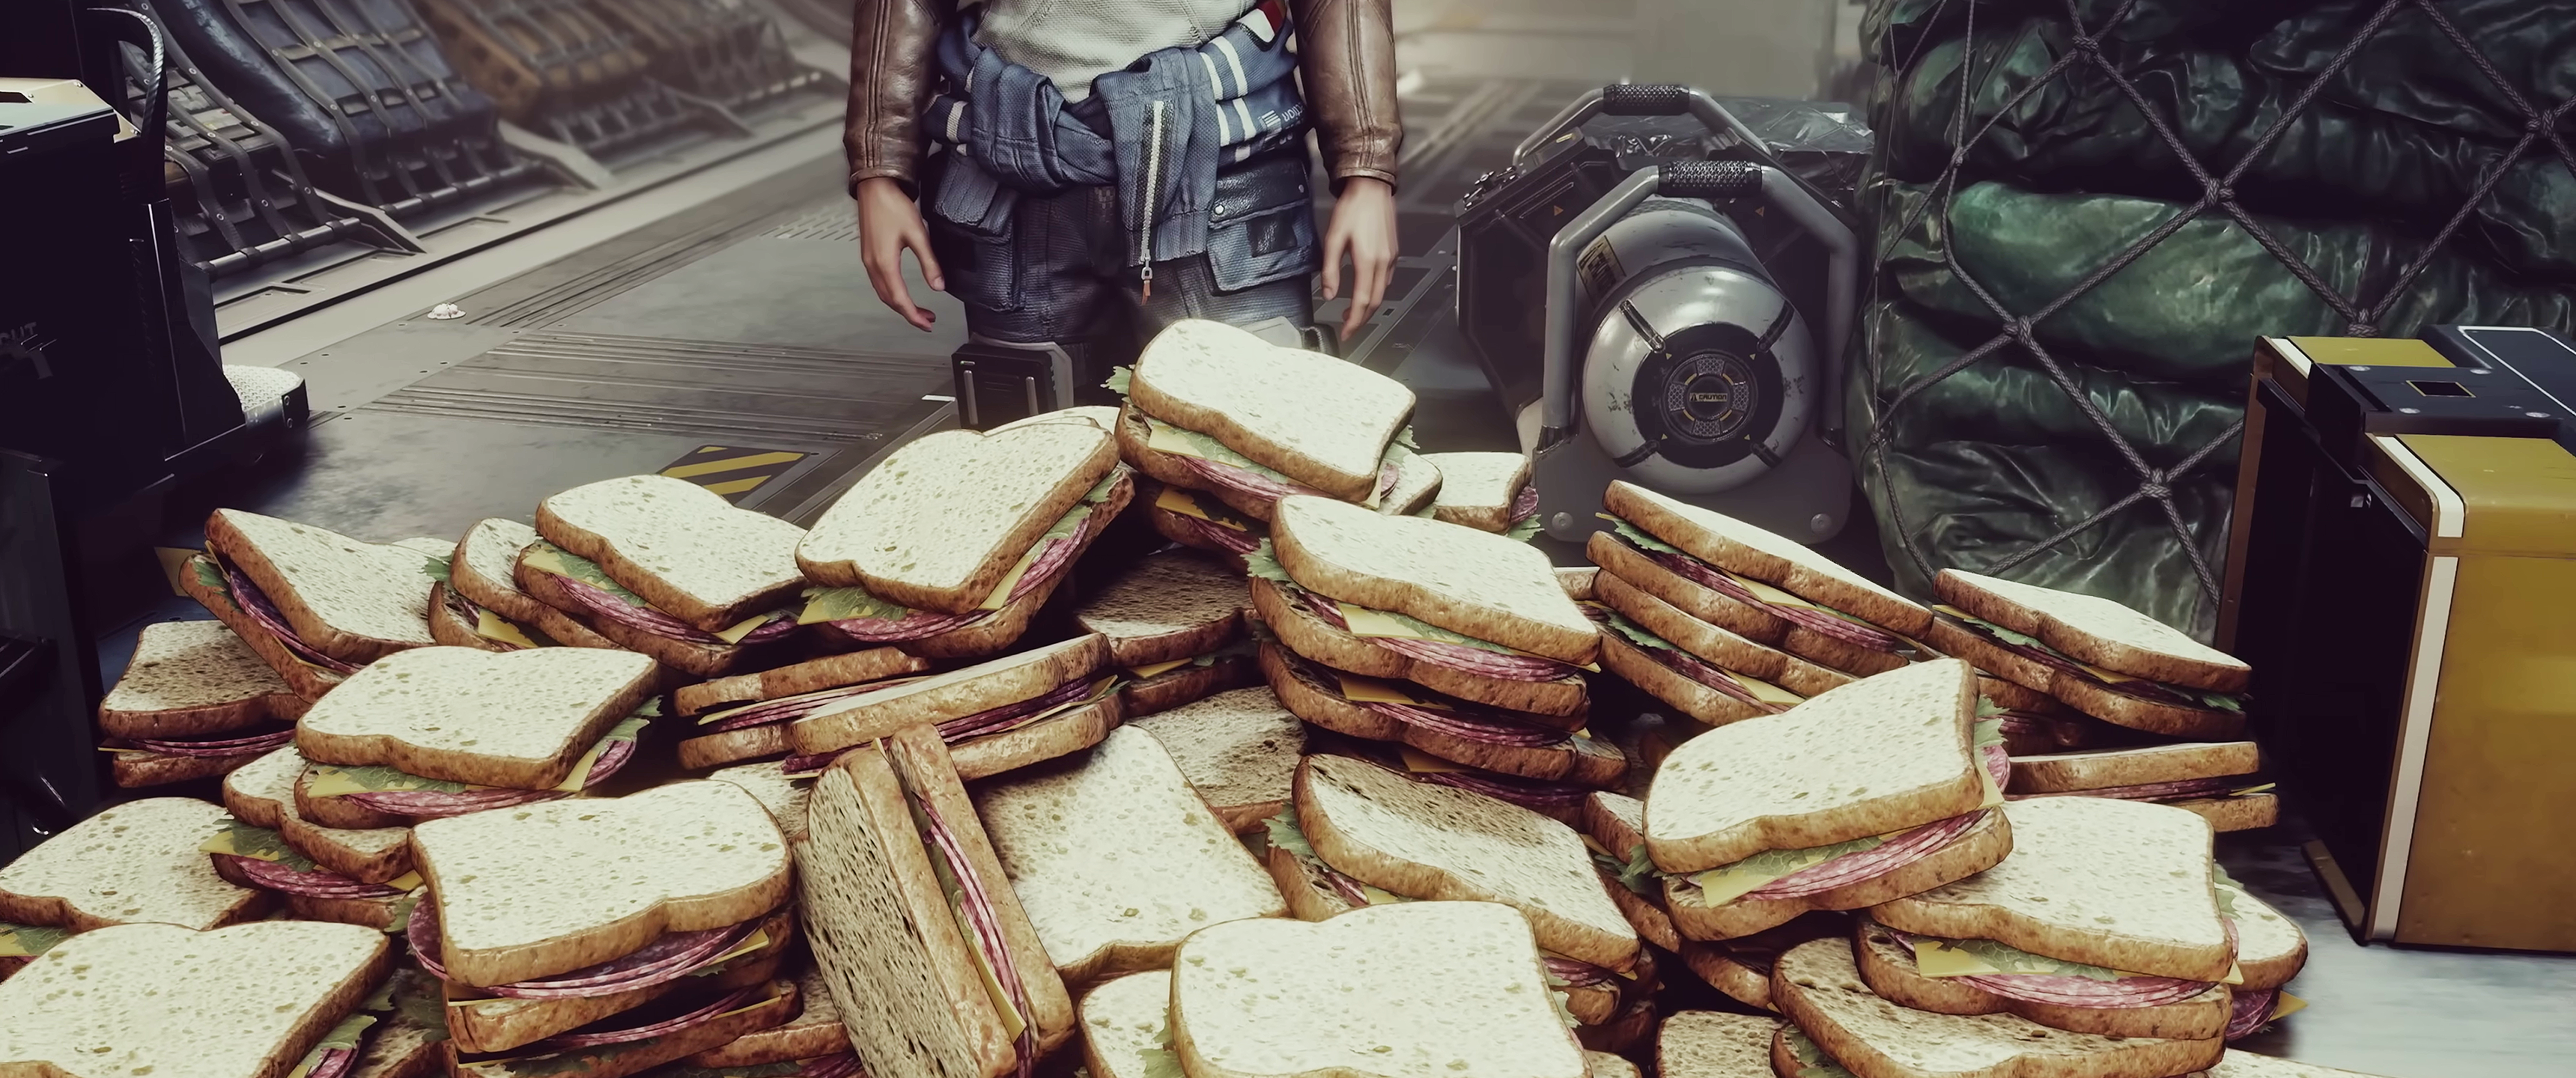 Starfield Bethesda Softworks Space Video Games Sandwiches CGi Food Video Game Characters 3440x1440